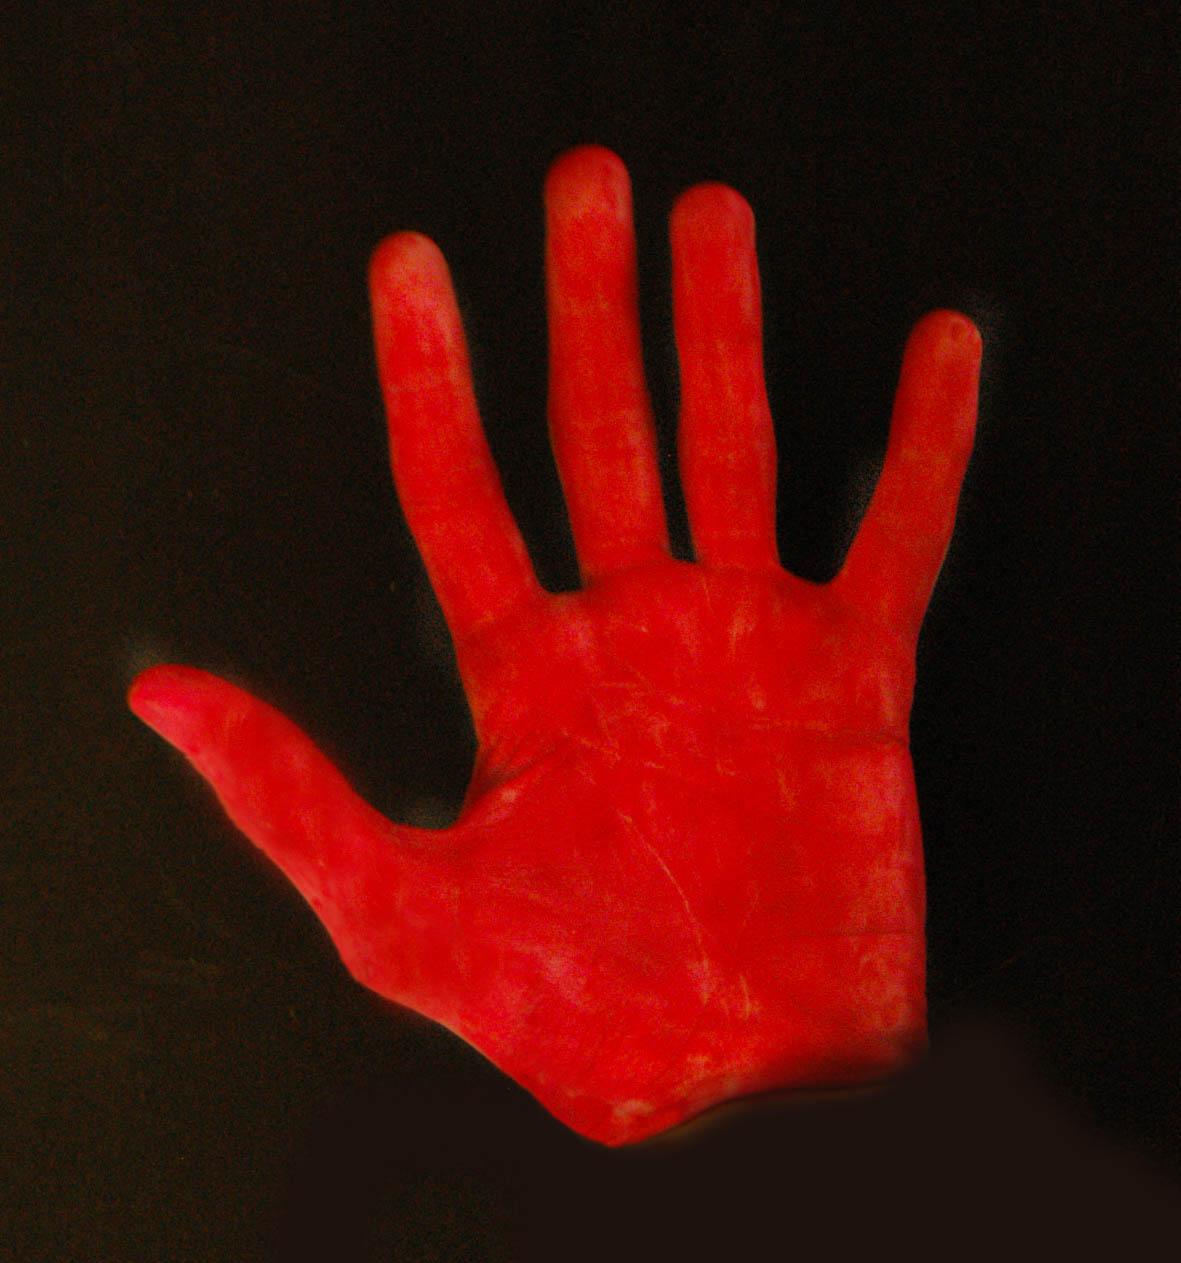 Red Handed [1987]